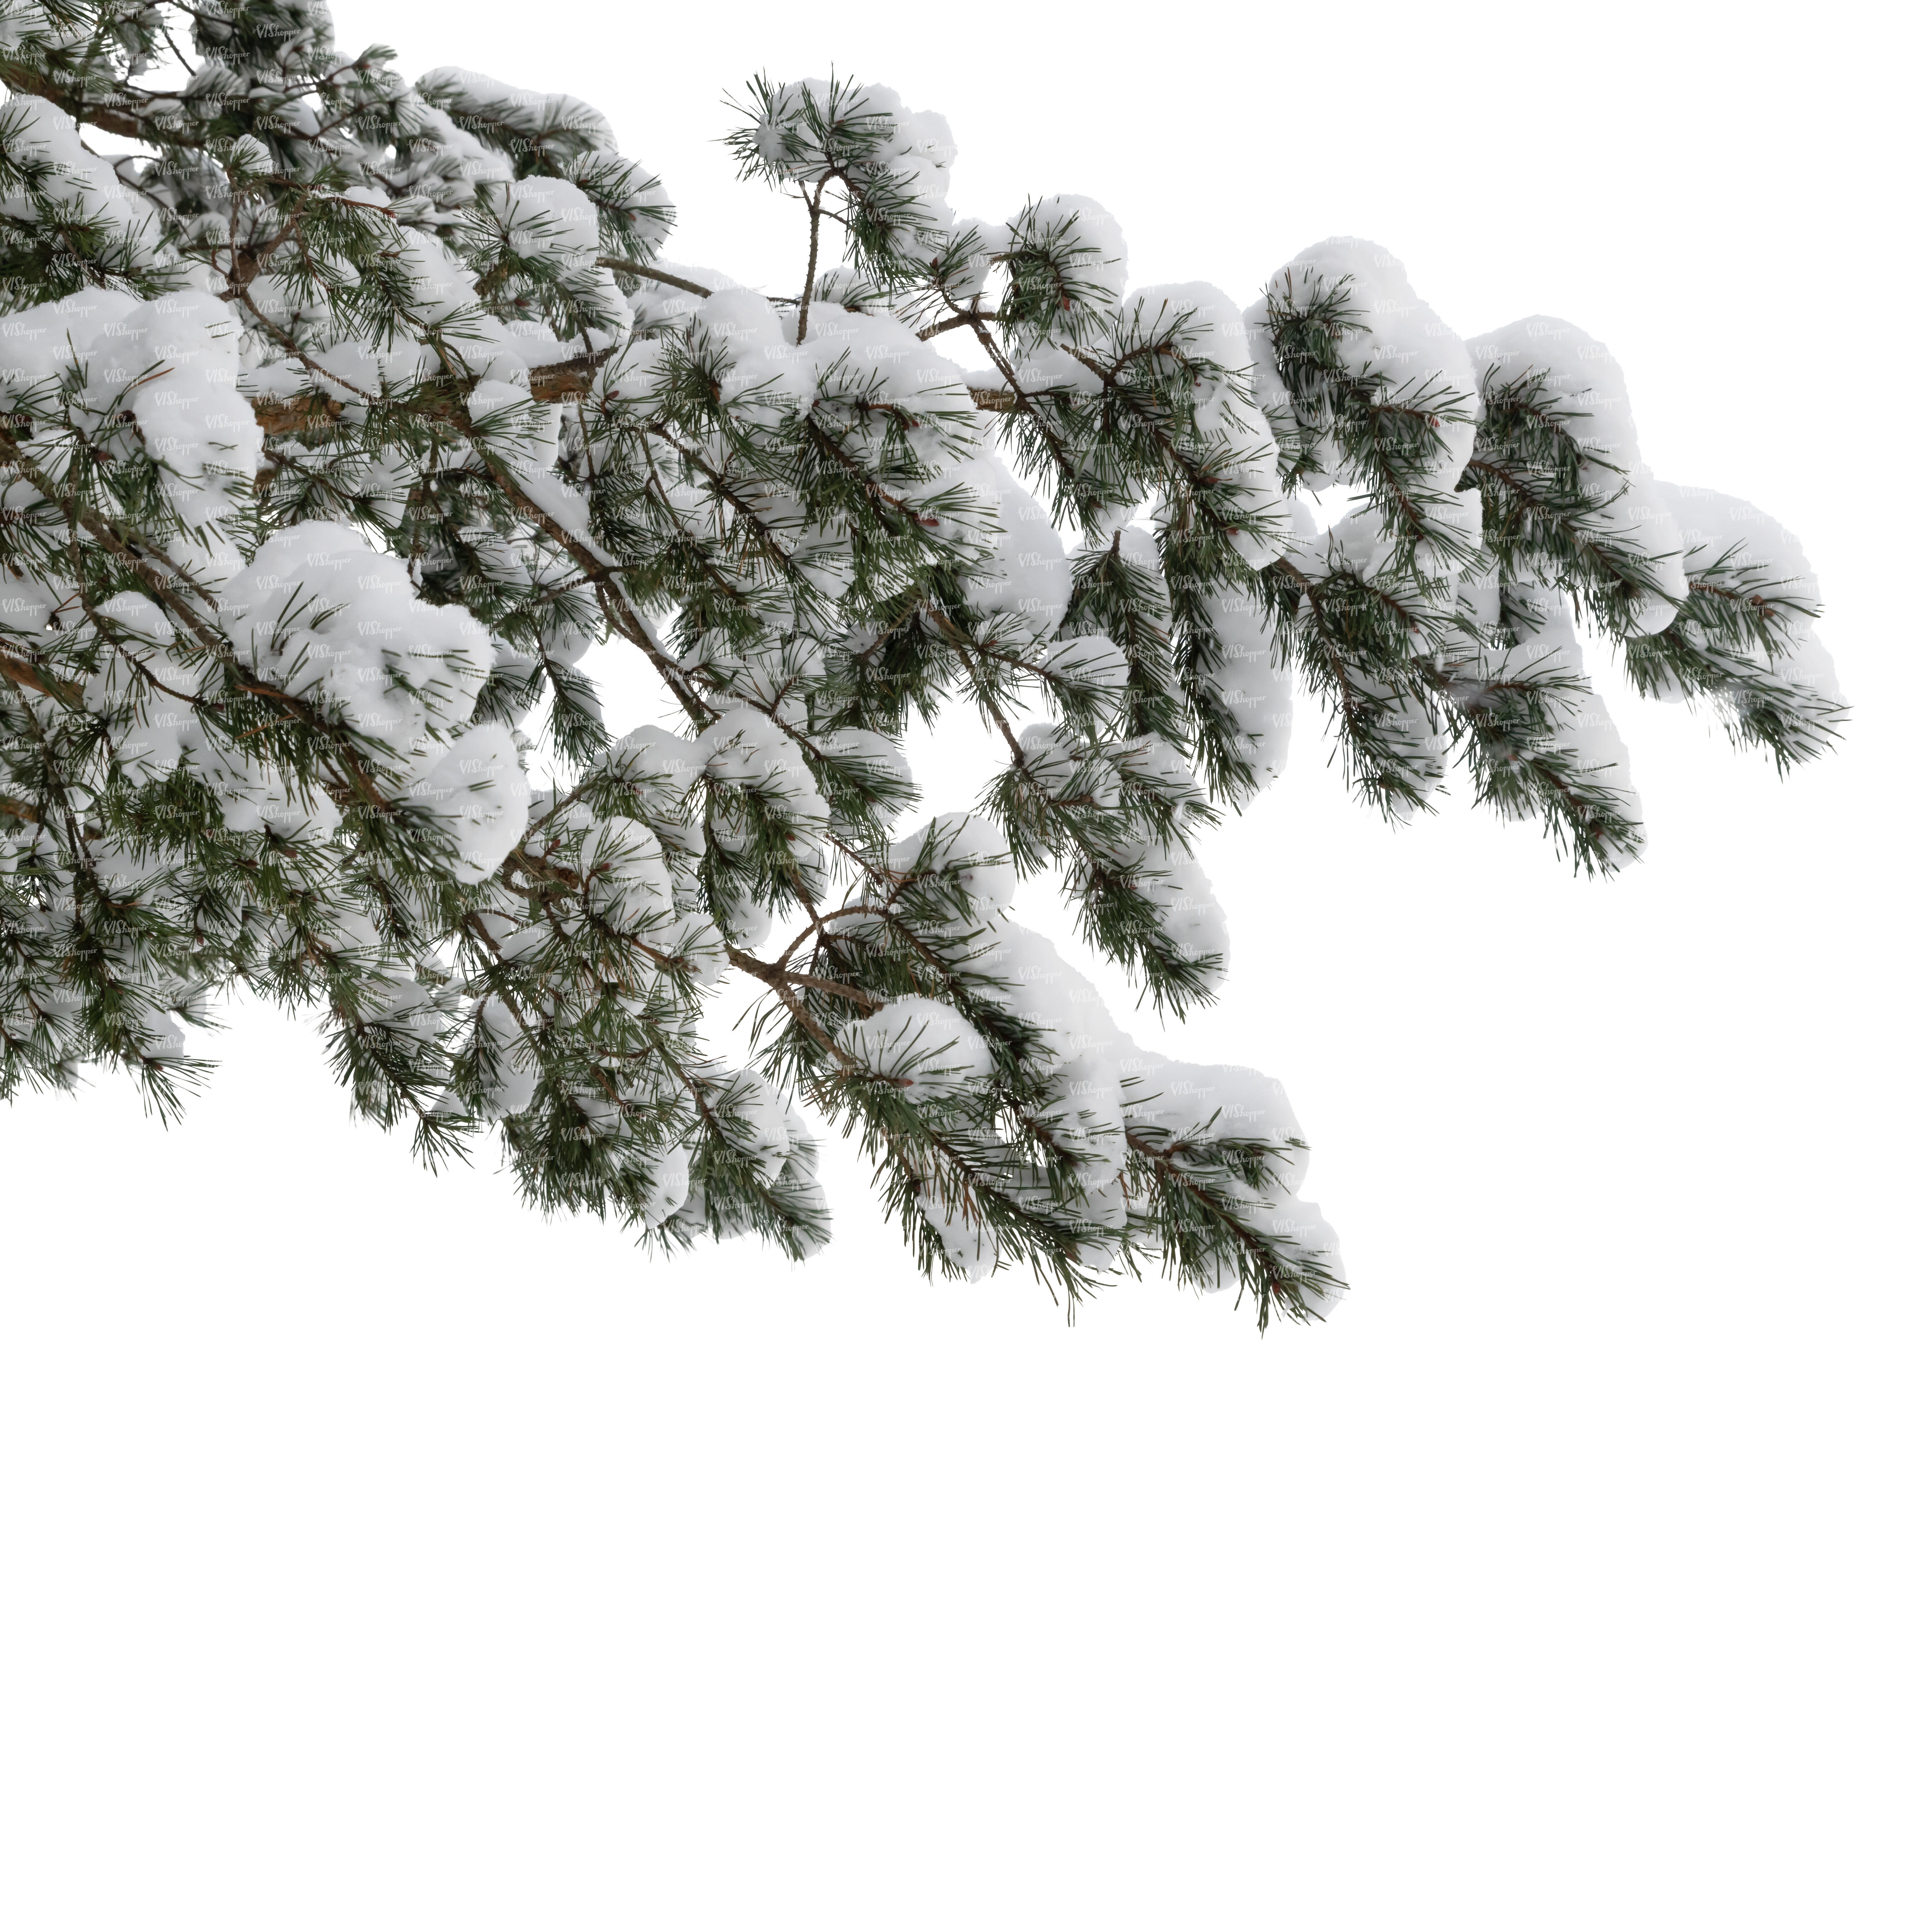 Image of Pine bush with snow on it